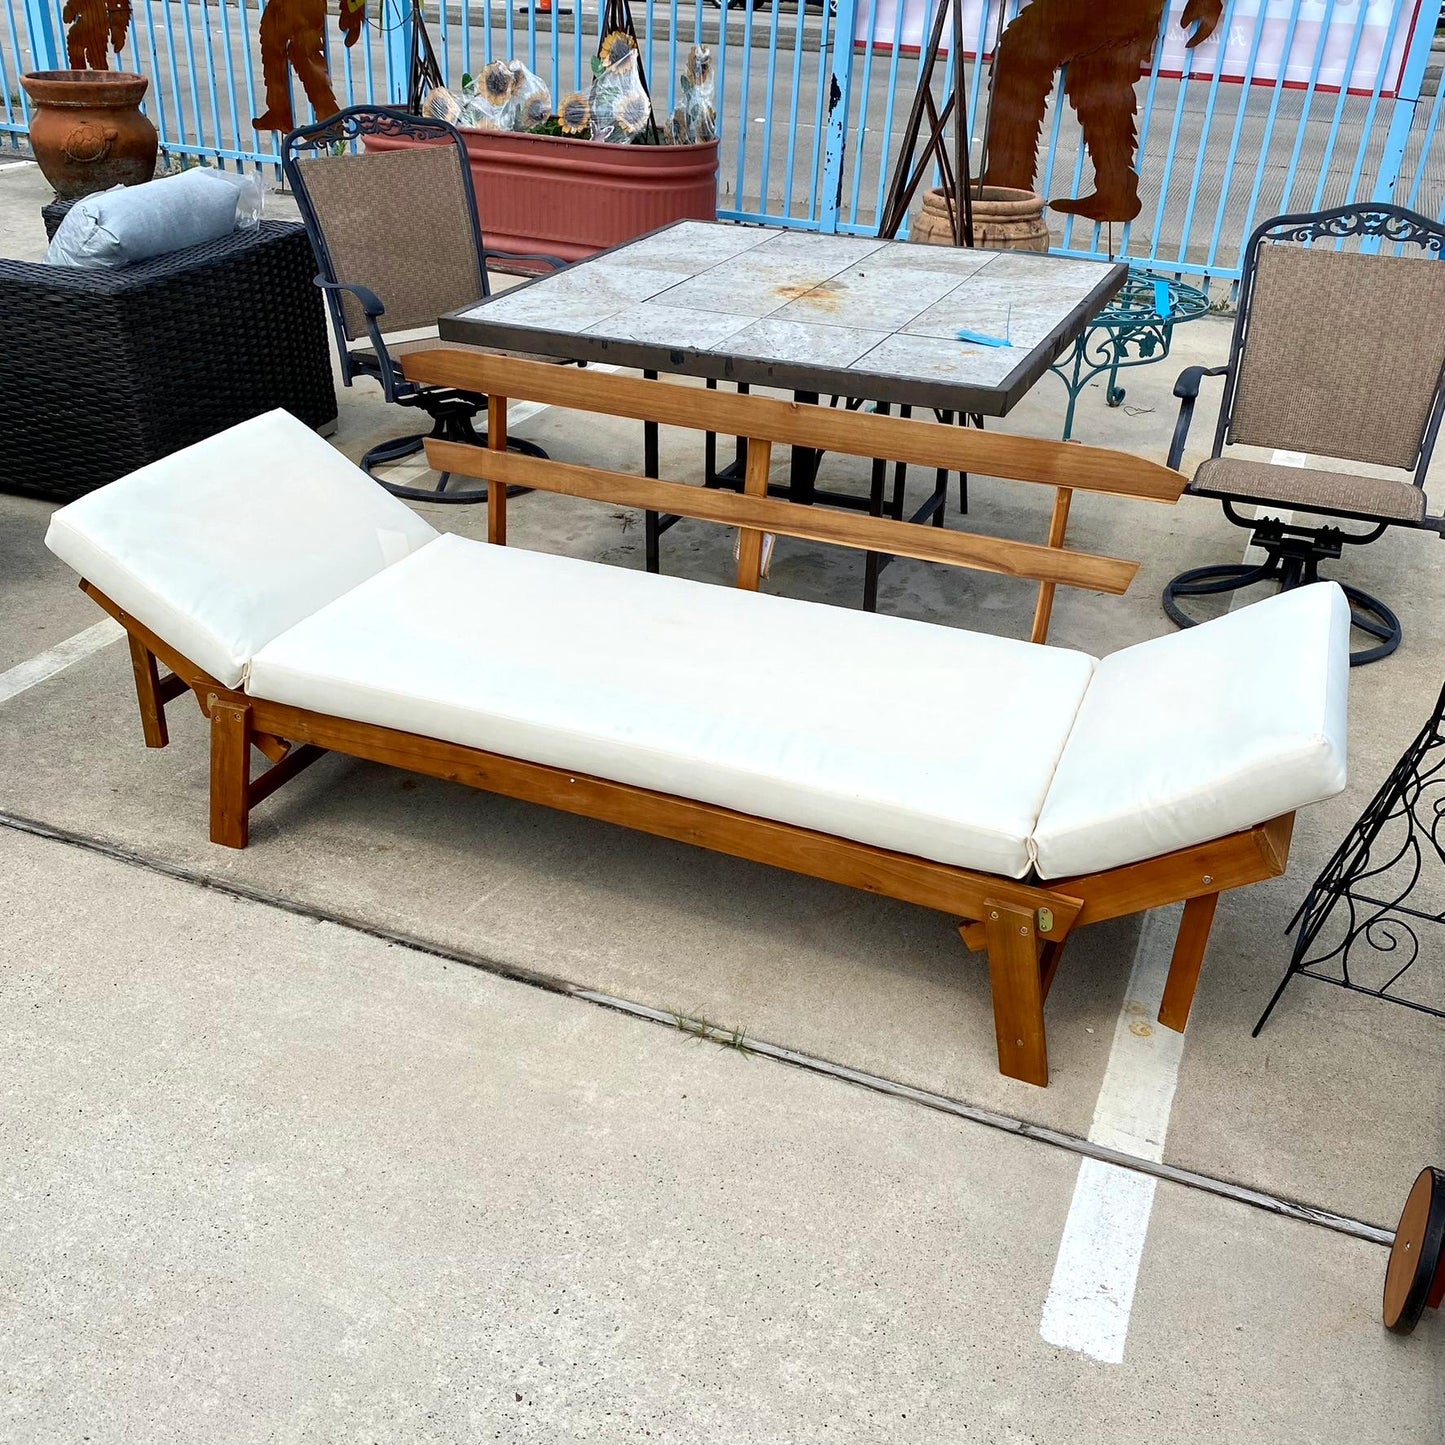 Tandra Daybed - Missing Back Cushions